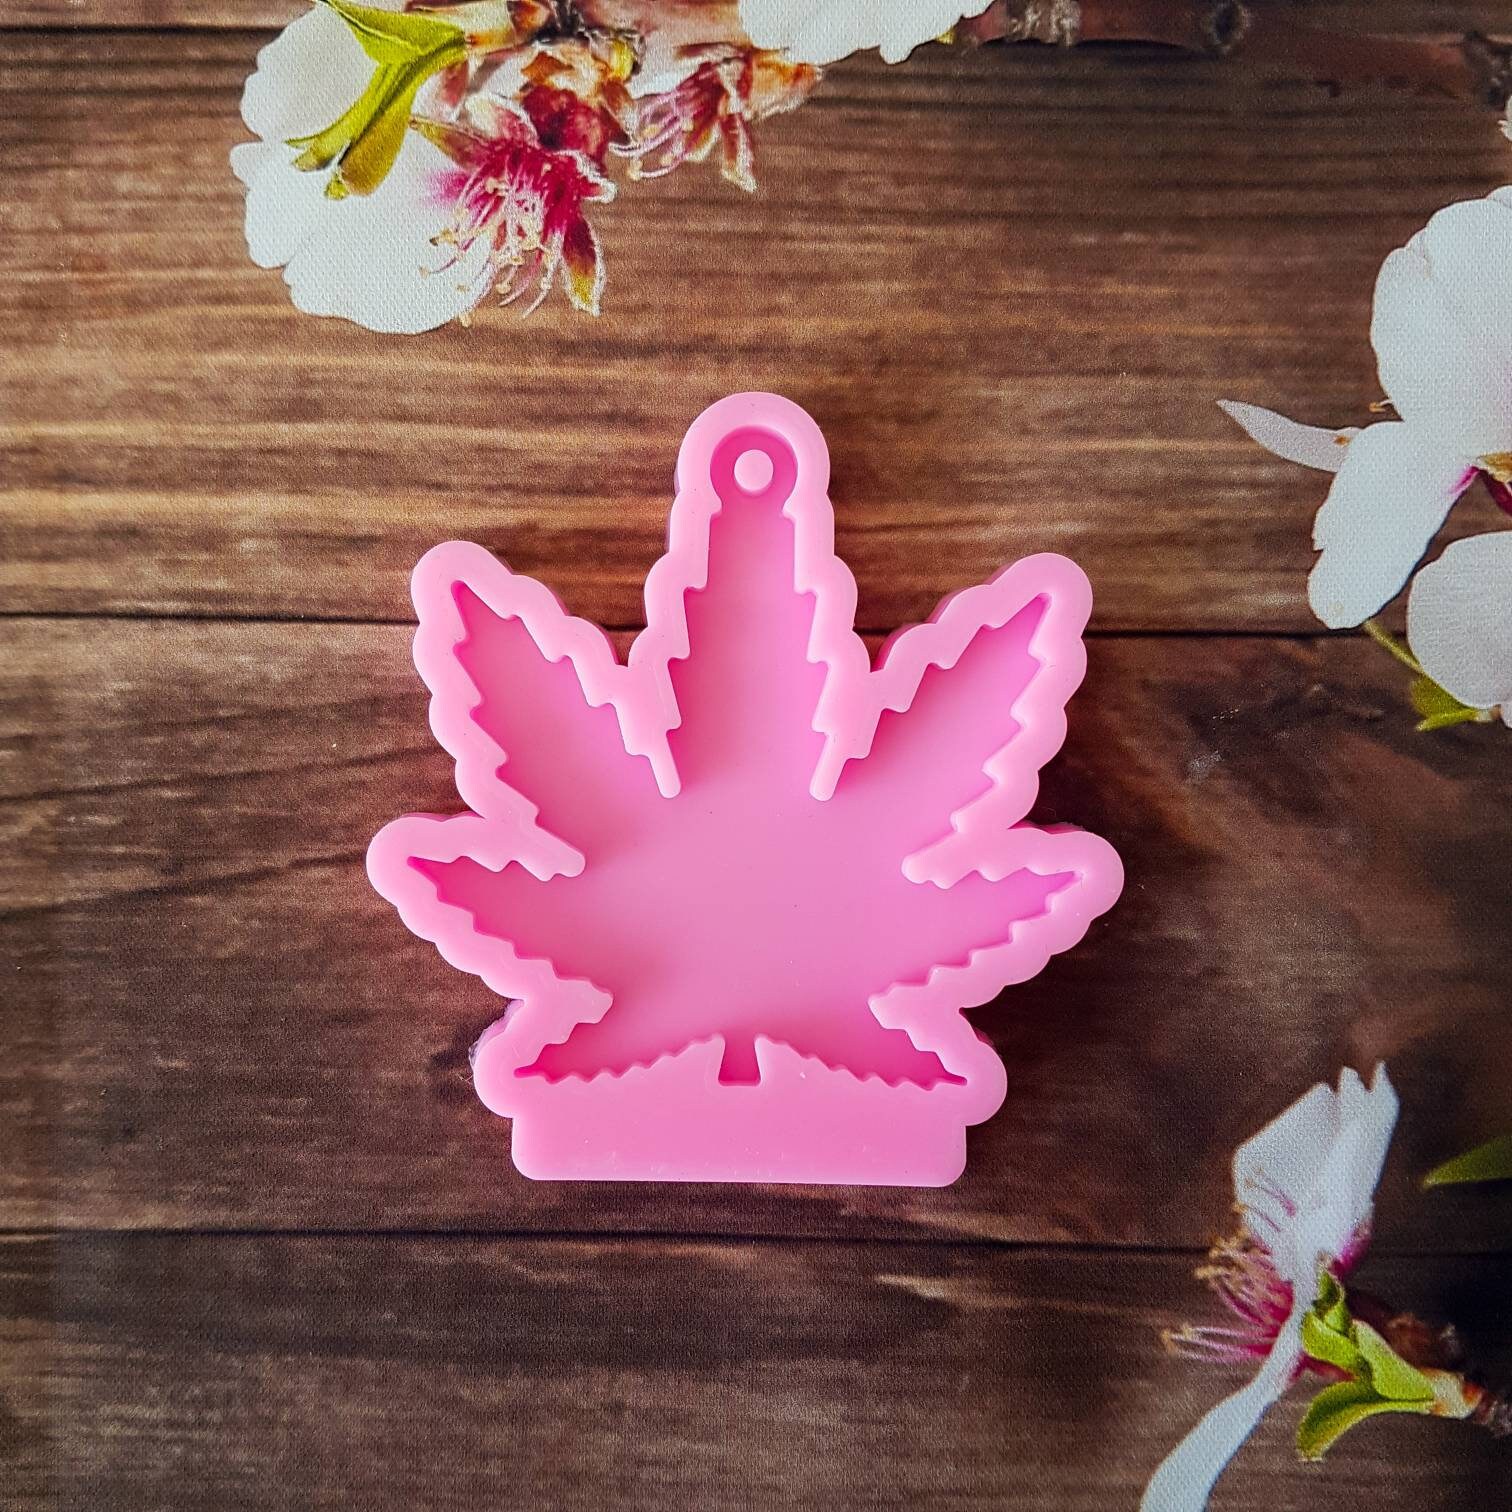 Grinder Resin Mold-weed Grinder Silicone Mold-grinder Leaf Mold-epoxy Resin  Molds for Jewelry-craft Supplies Mold 